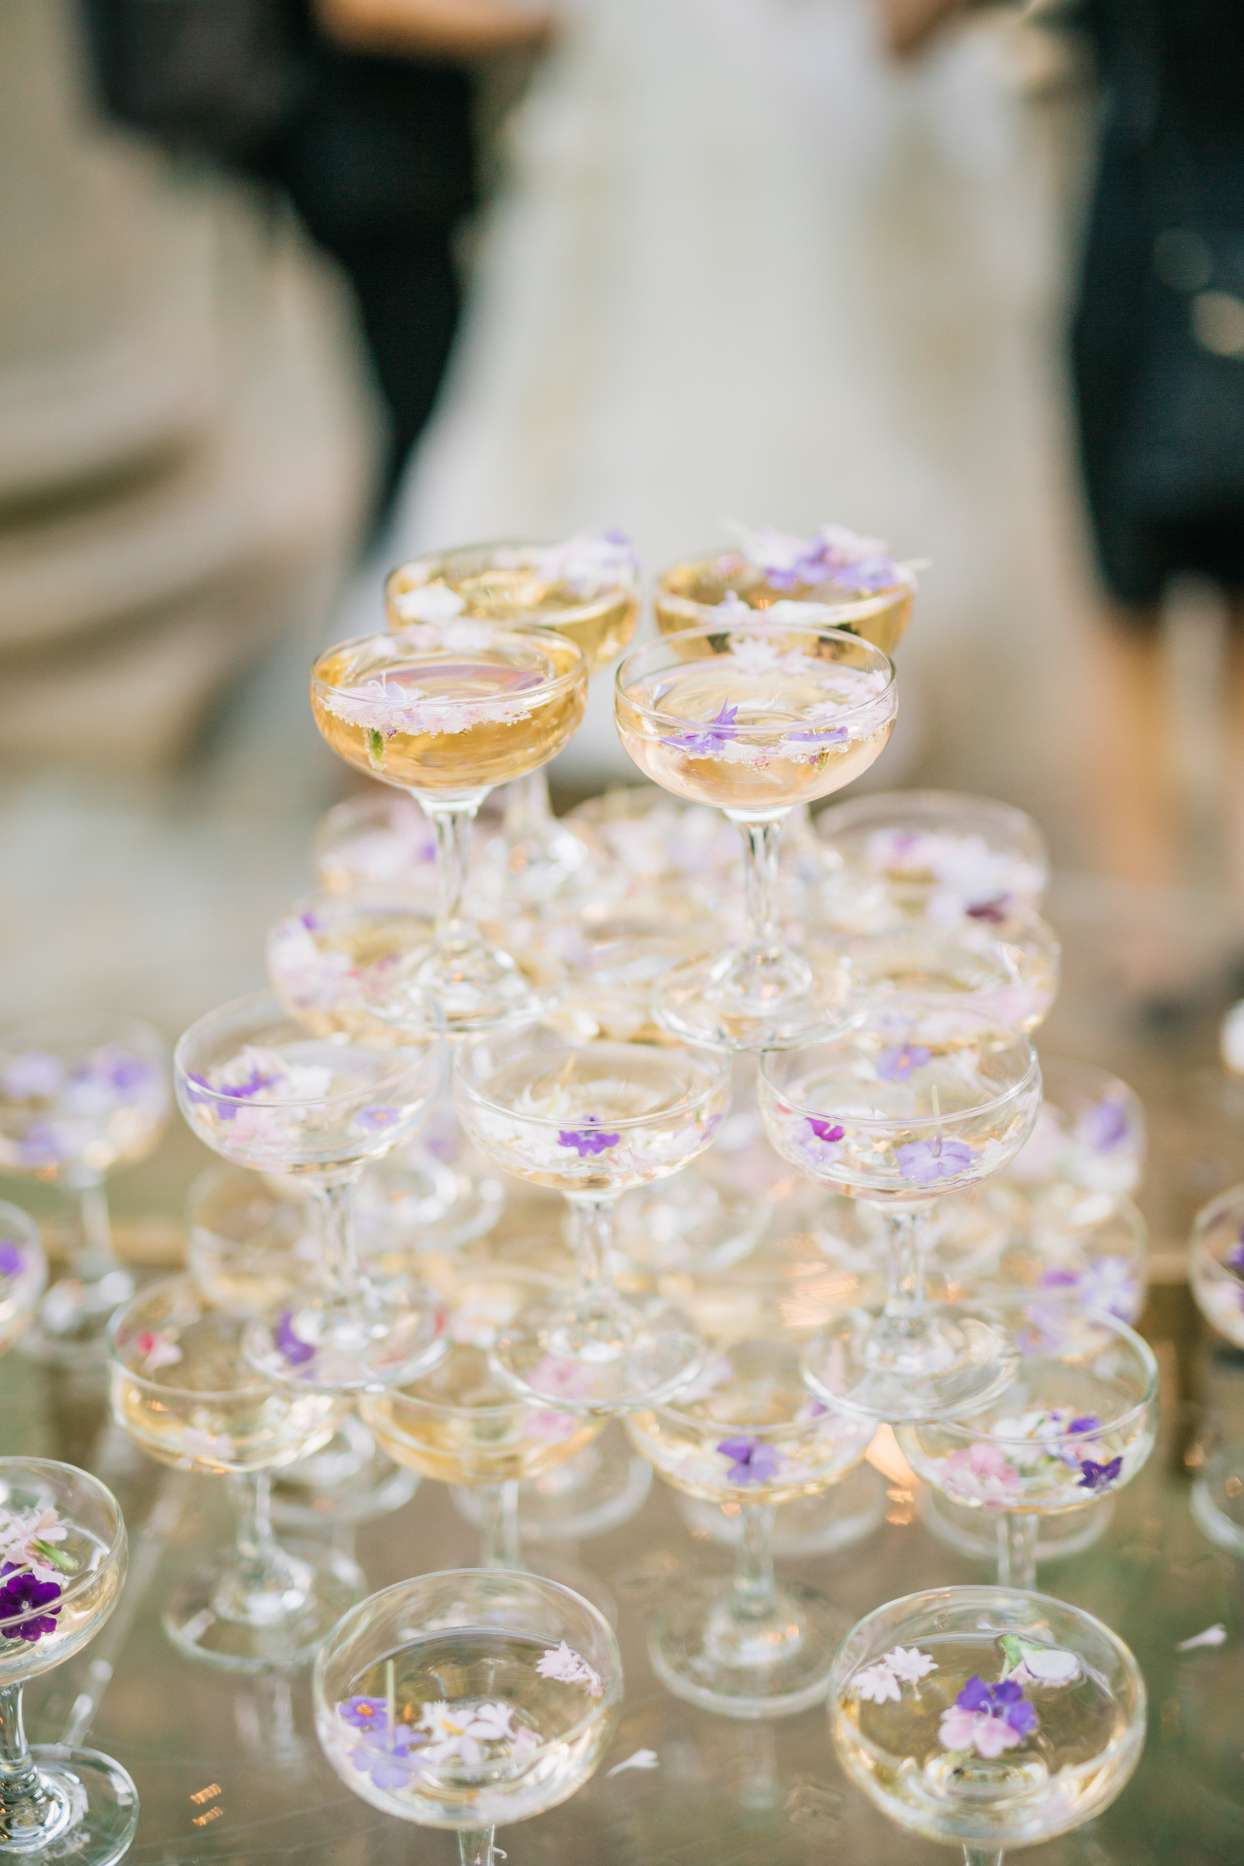 champagne tower with purple flowers in the coupe glasses